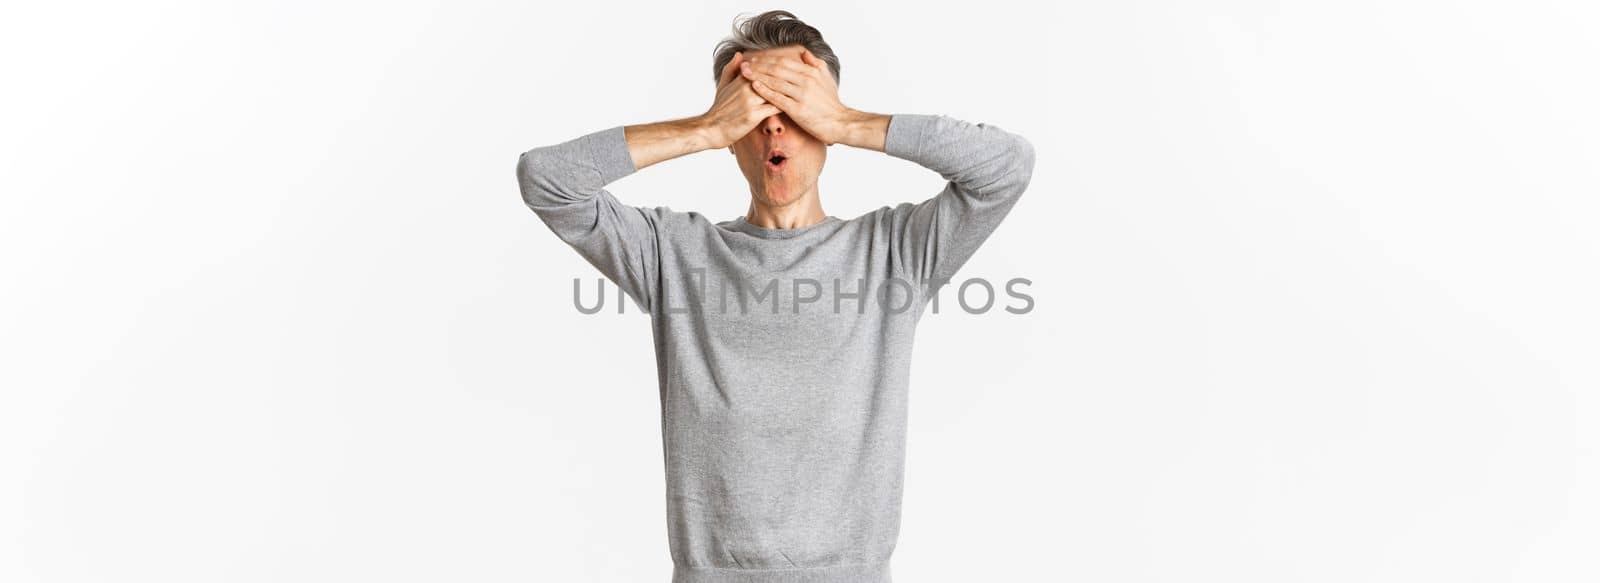 Image of excited middle-aged guy in grey sweater, cover eyes with hands and looking amazed while waiting for surprise, playing hide-n-seek, standing over white background.